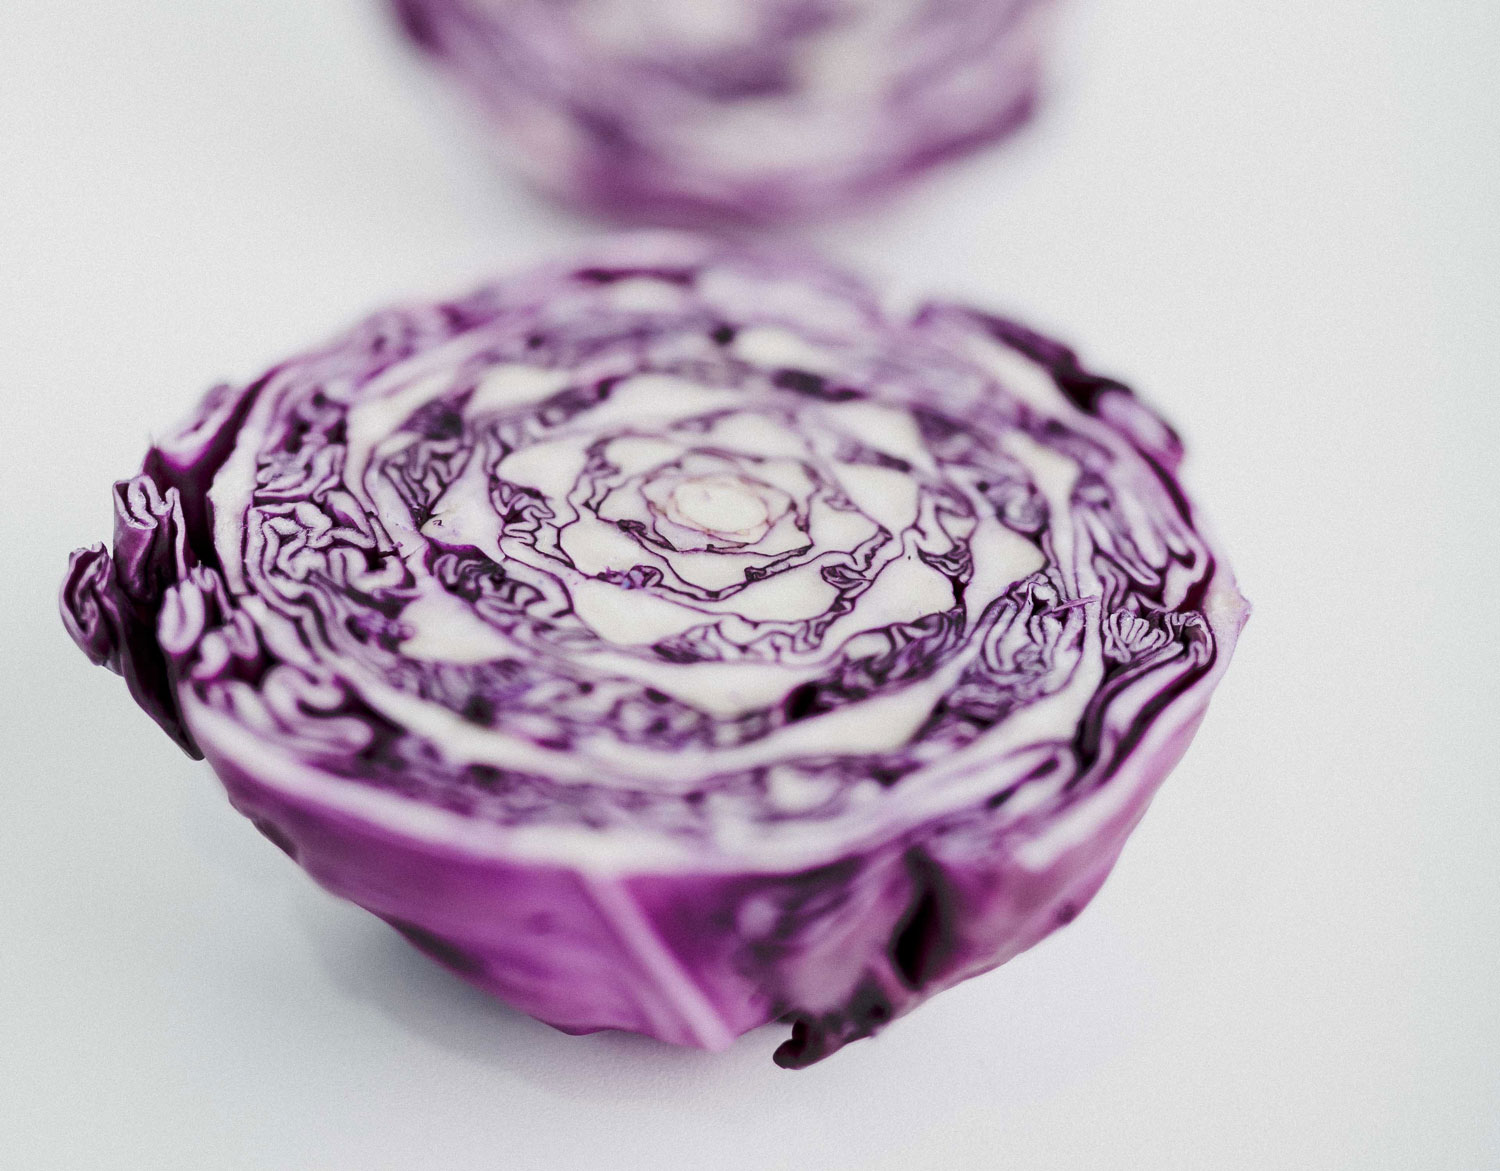 red cabbage reduces chronic inflammation